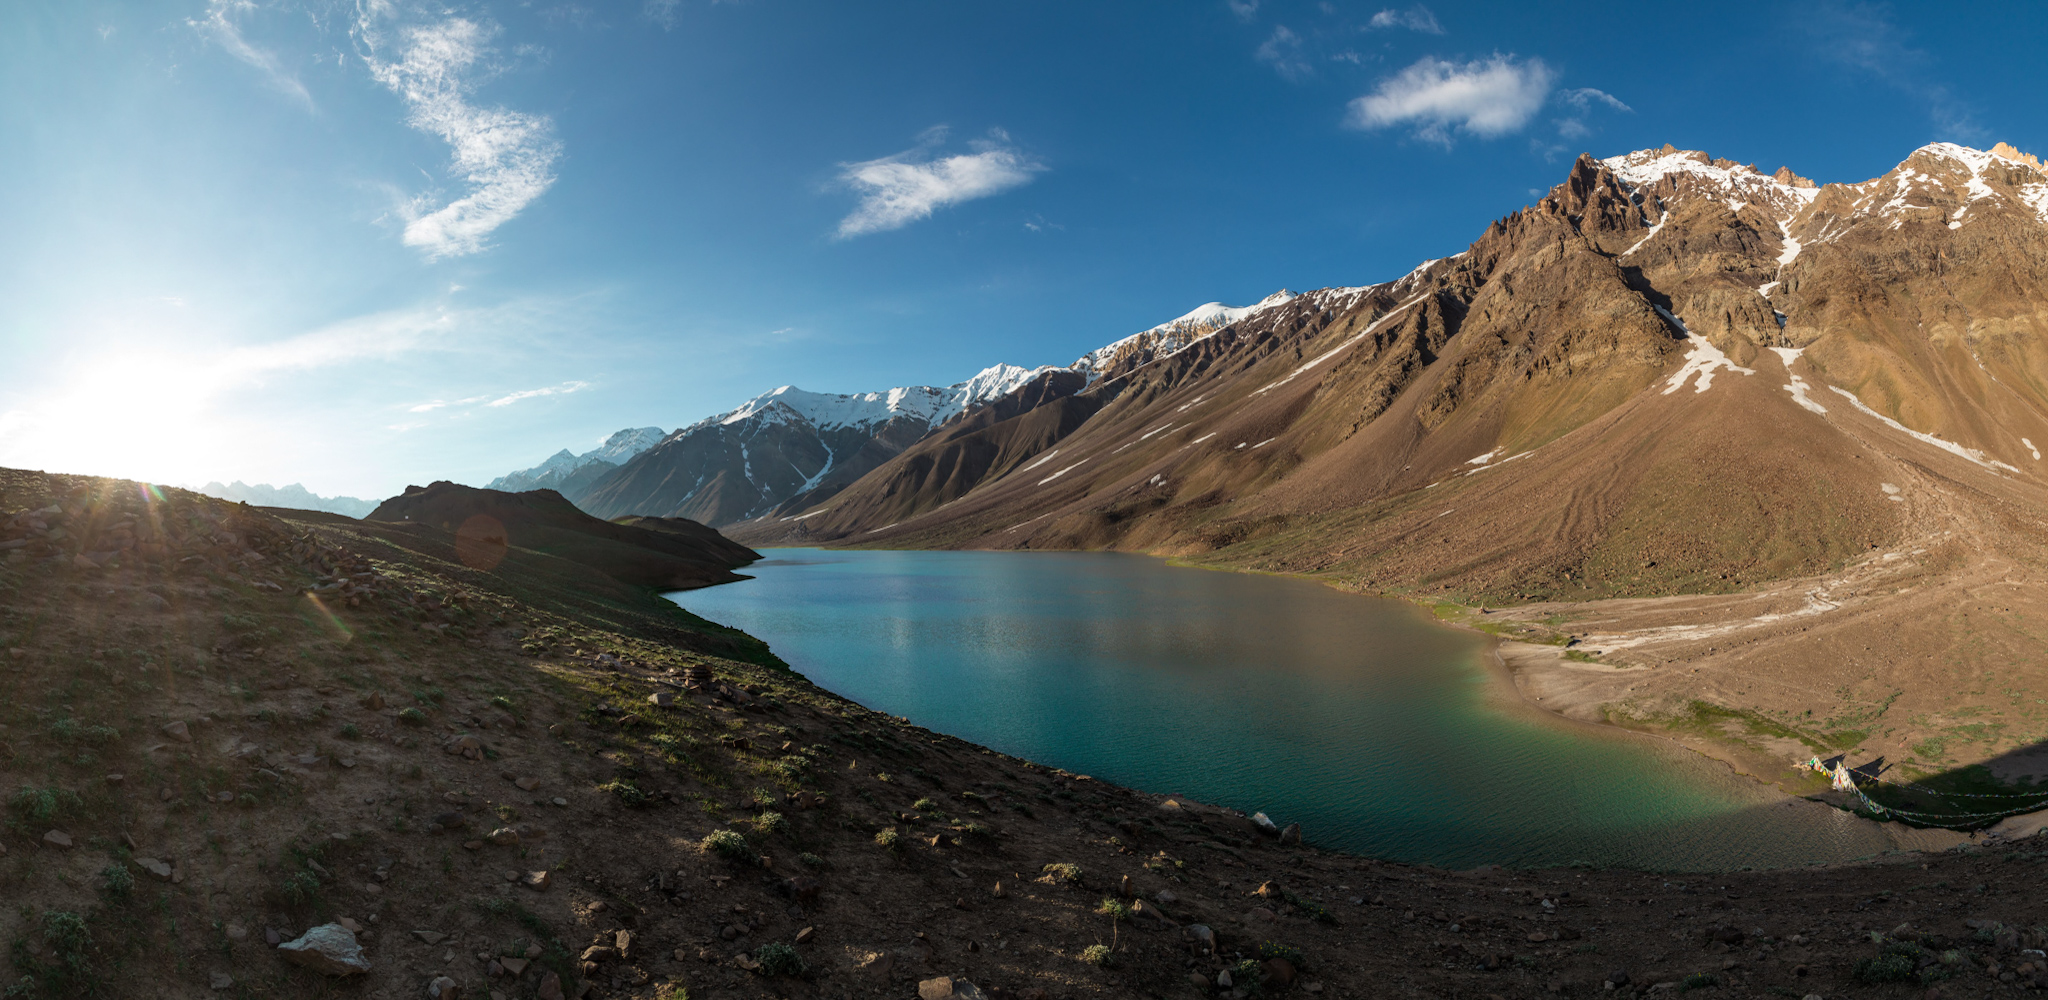 Chandra Taal Lake in Spiti Valley